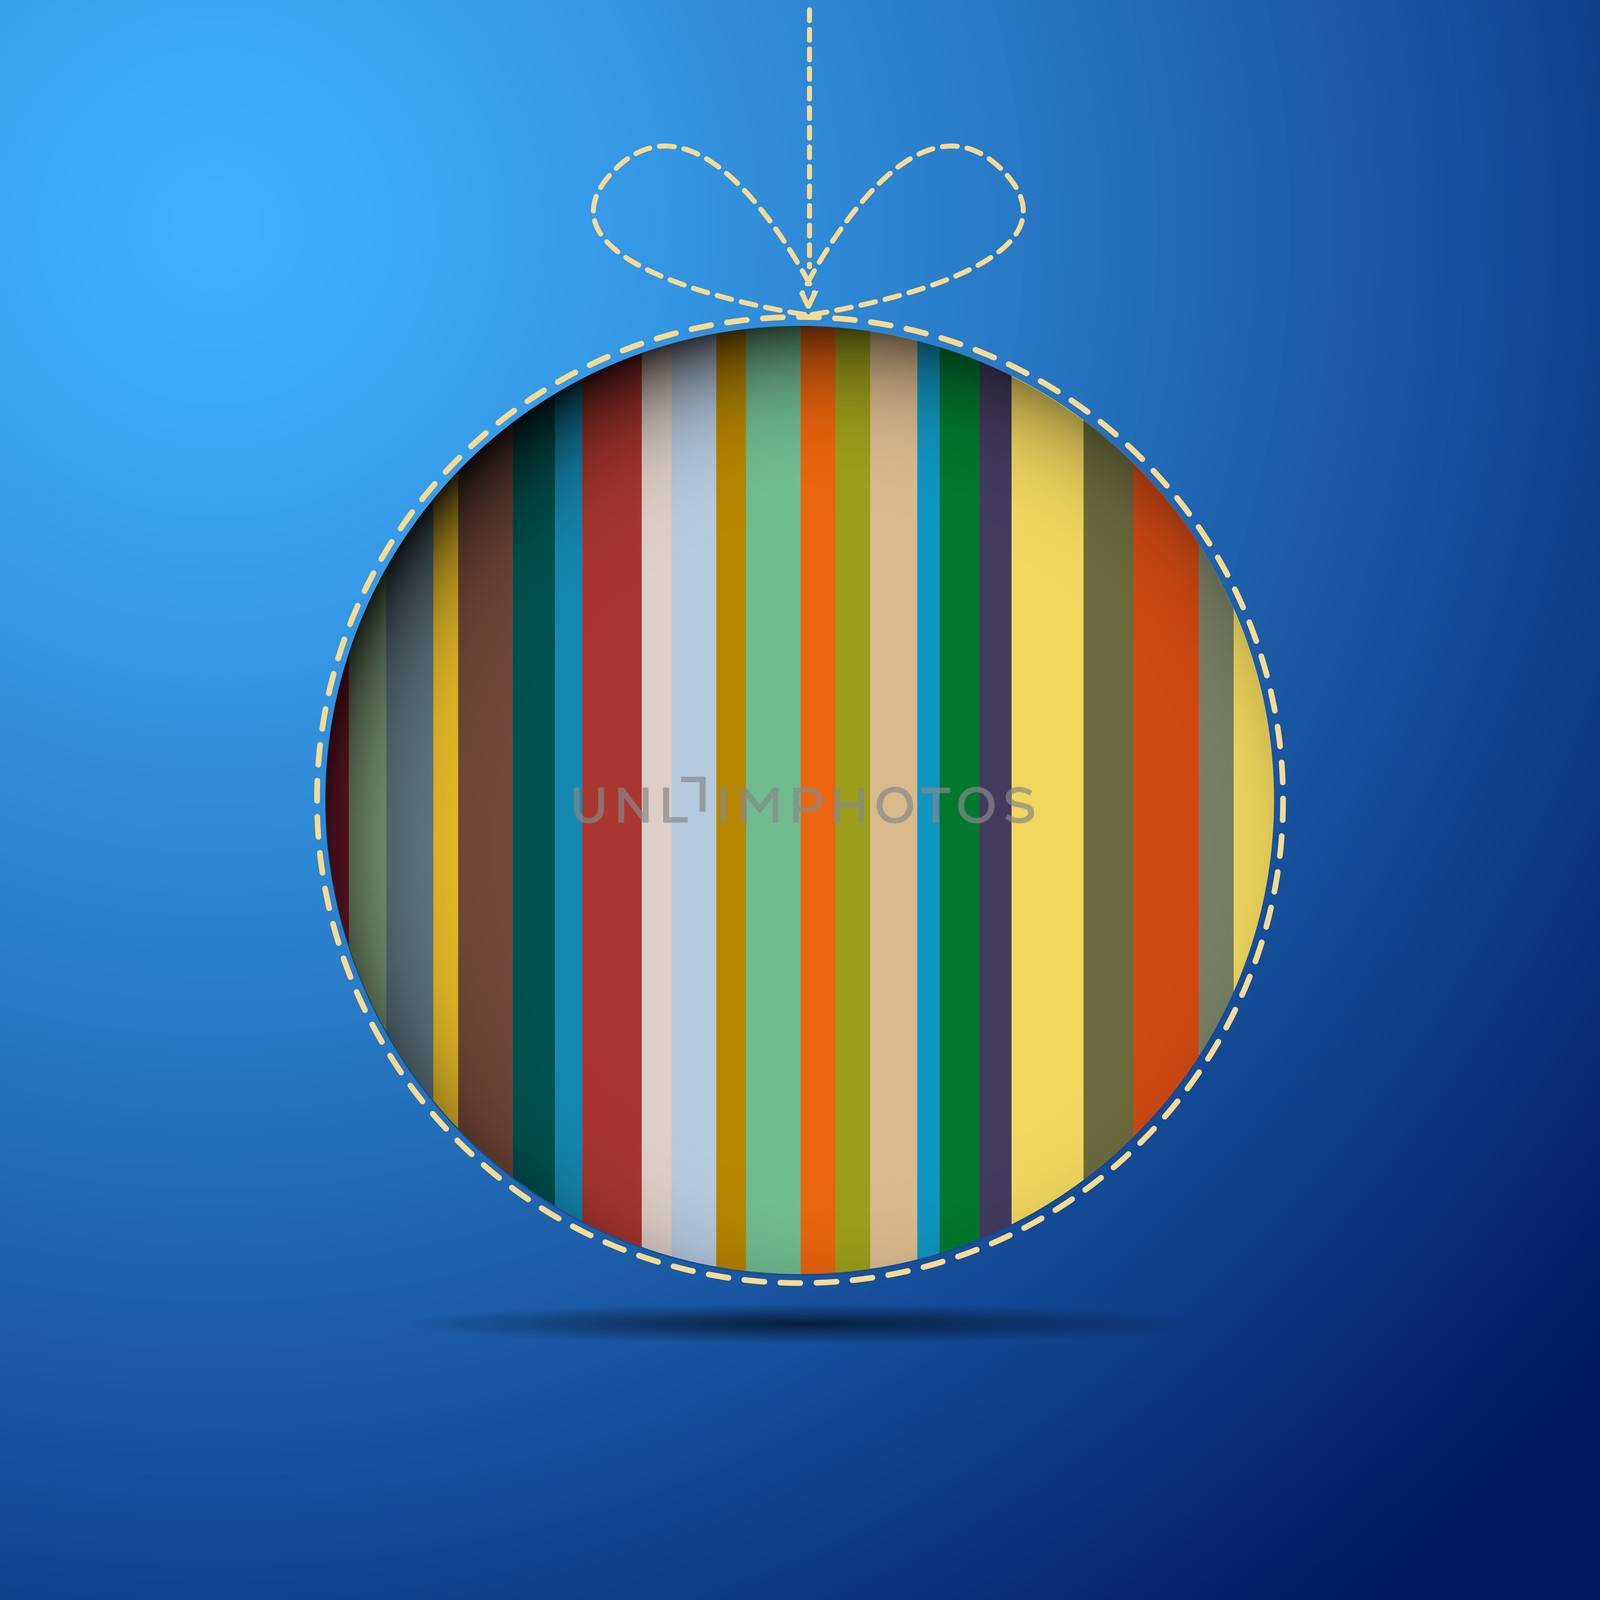 Colorful circle on a blue square background